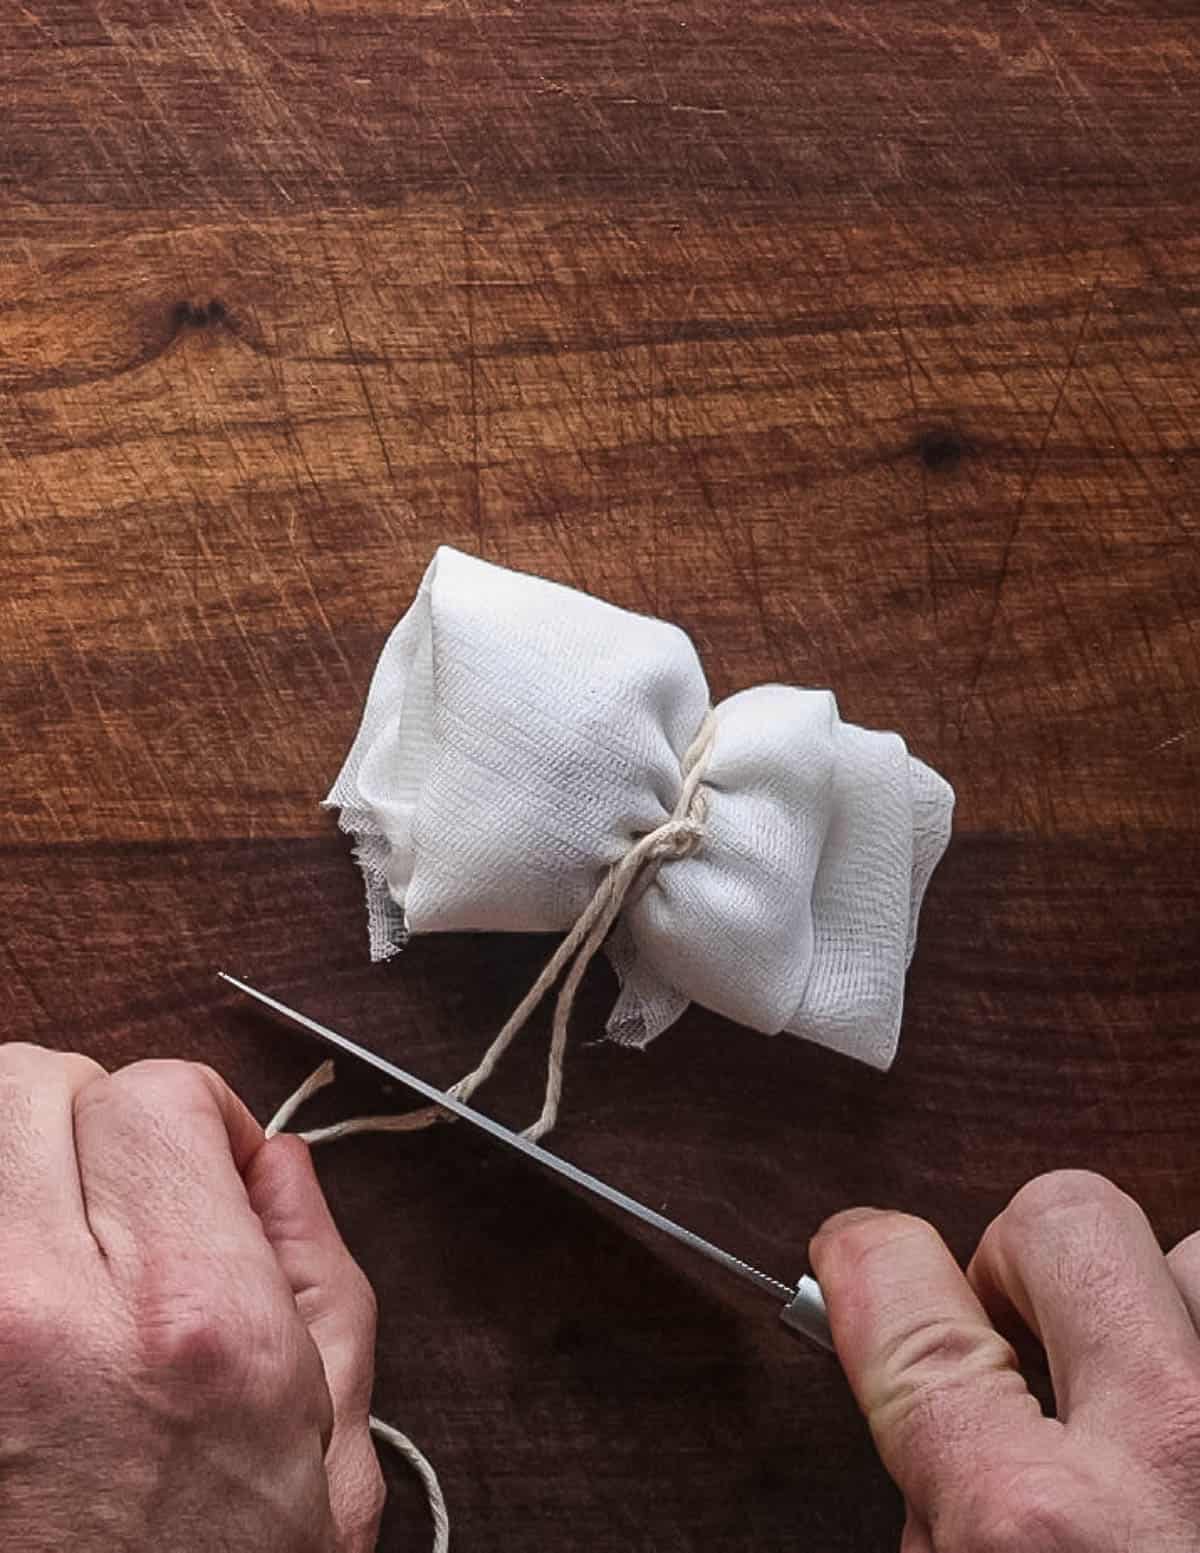 Cutting twine on a bundle of cheesecloth.